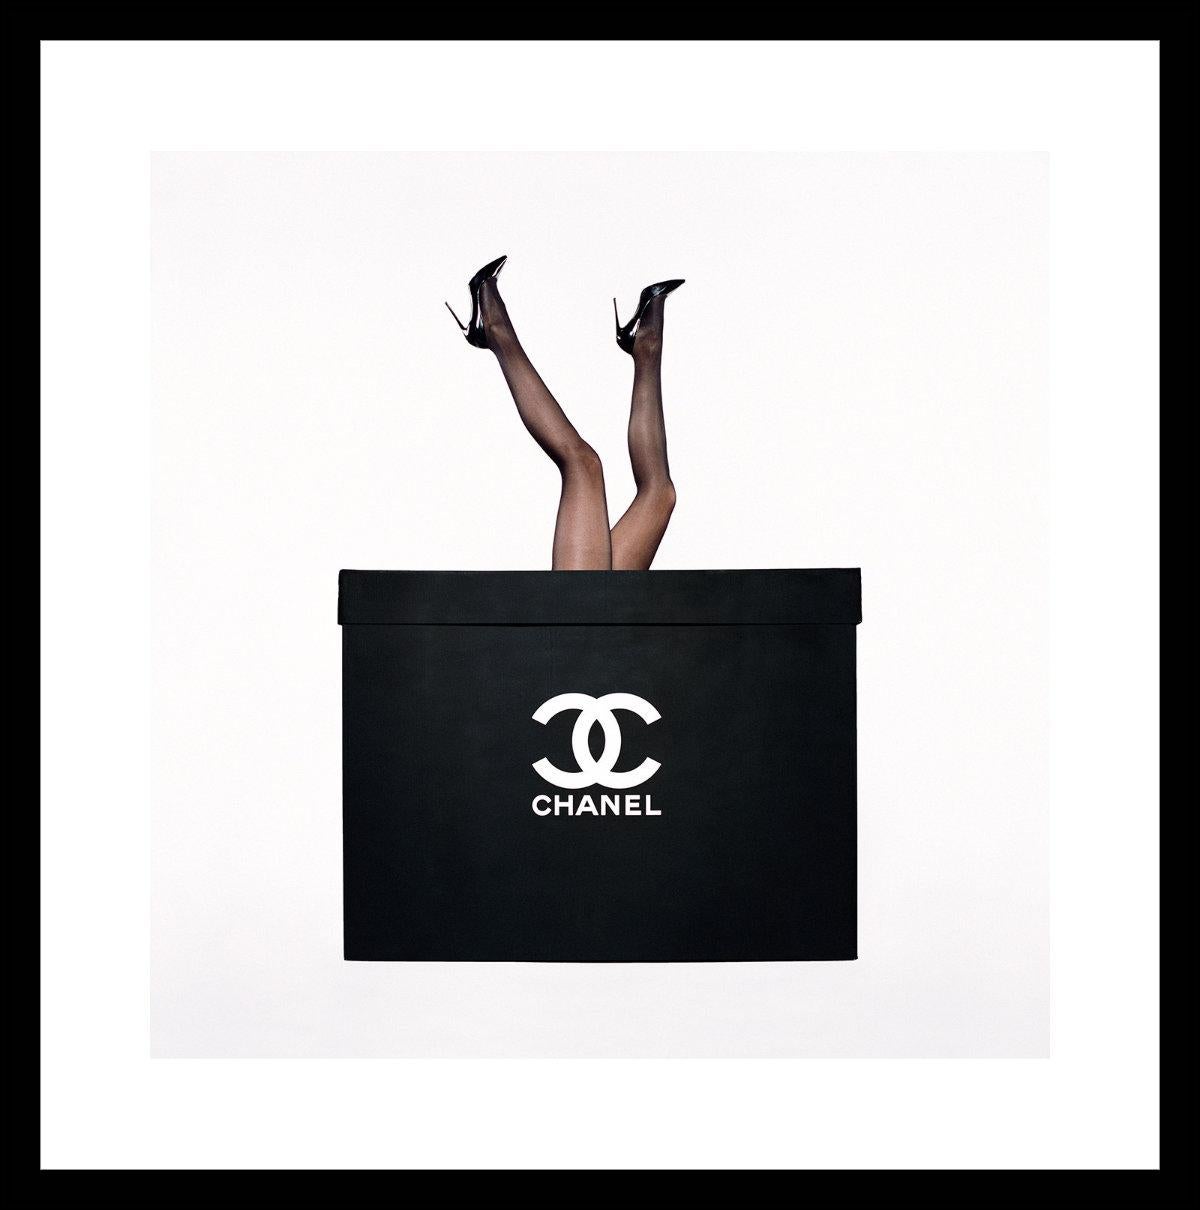 Tyler Shields - Chanel Legs, Photography 2016, Printed After For Sale 1